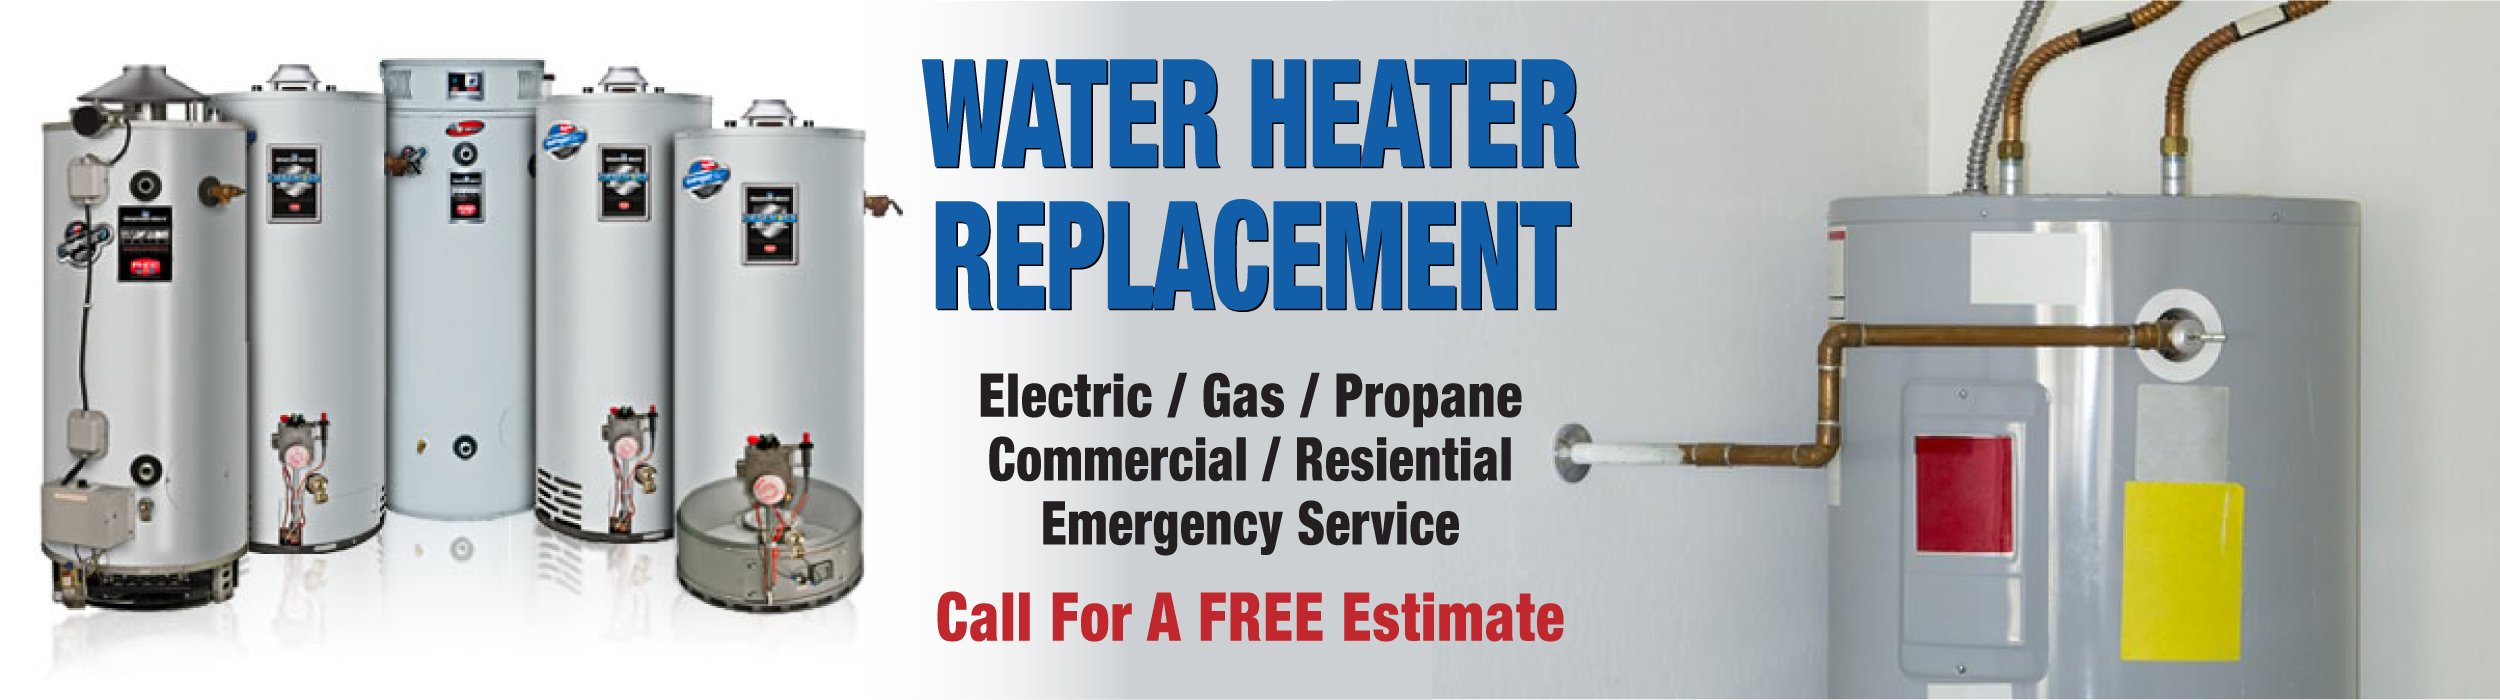 Water Heater Replacement - Free Estimates